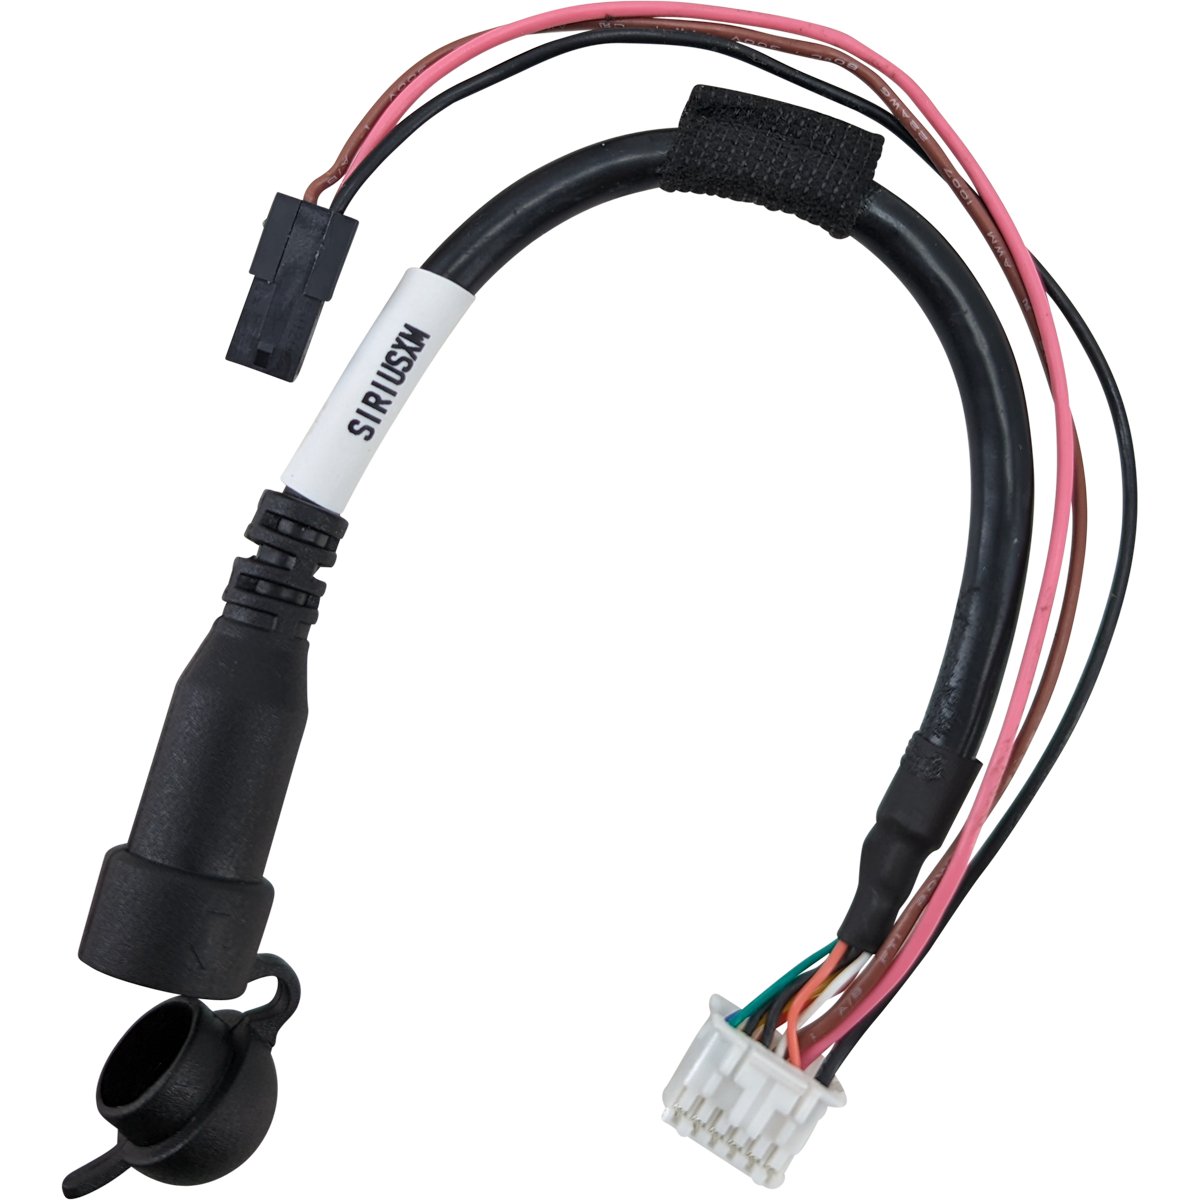 ENLIGHT10 Harness Connector for the HEIGH10 Radio